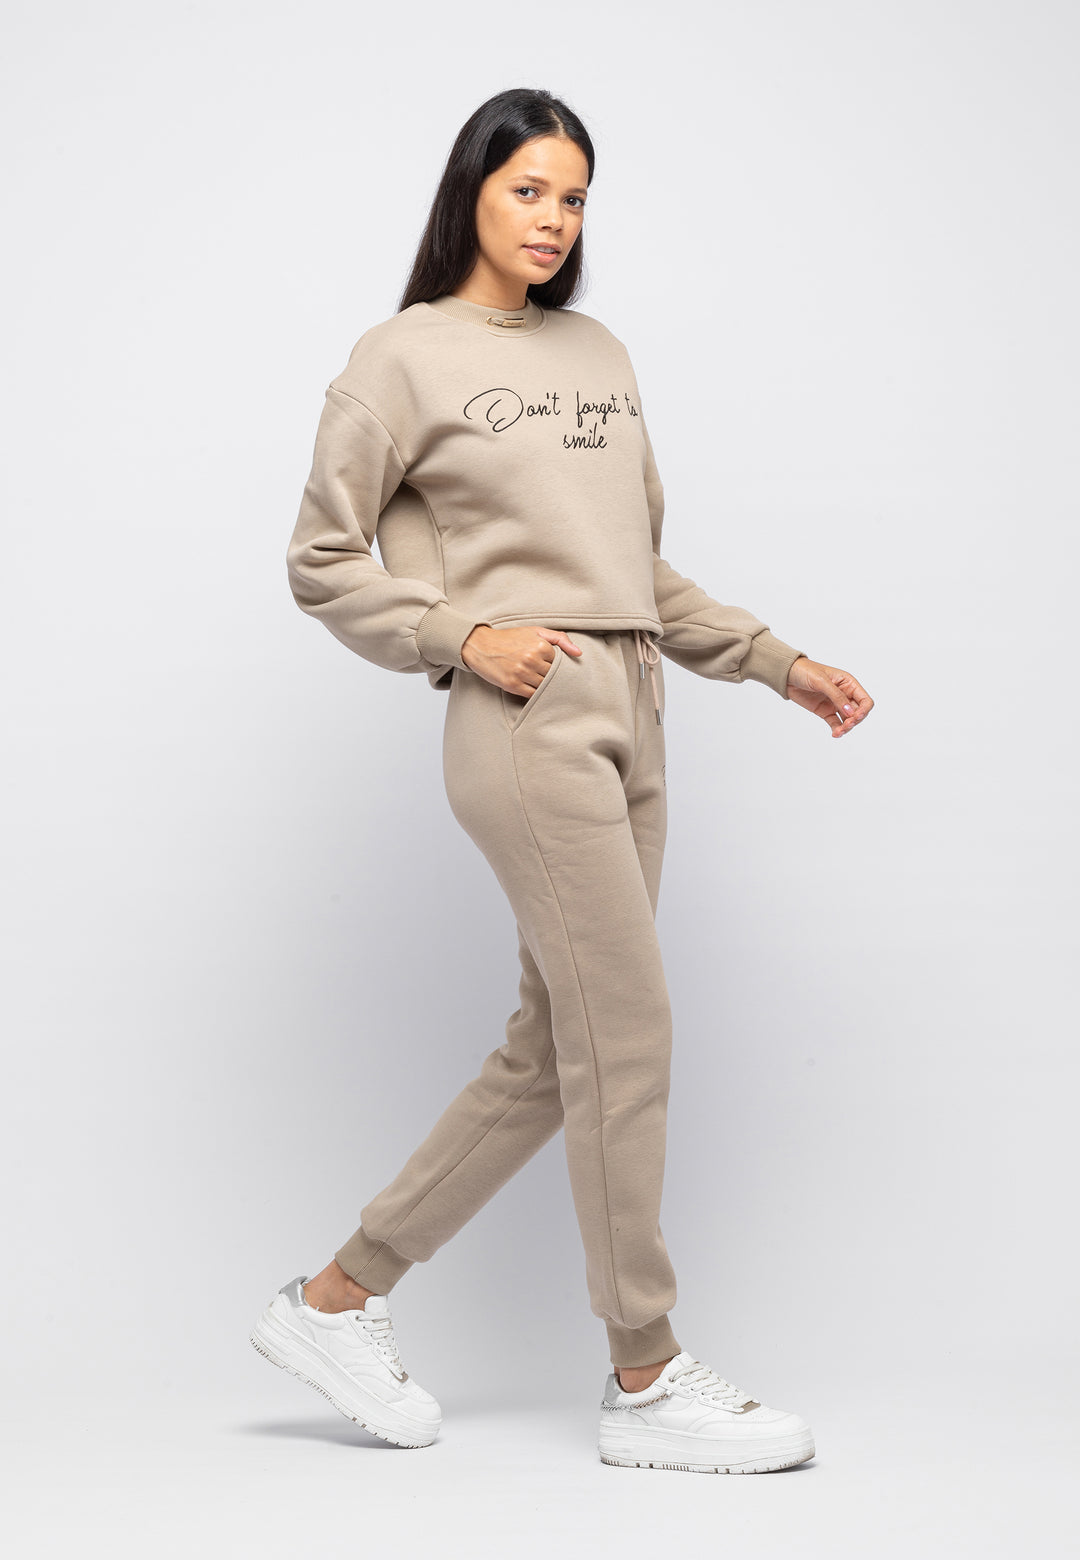 Tom Barron Ladies 'Smile' Embroidered Casual Tracksuit